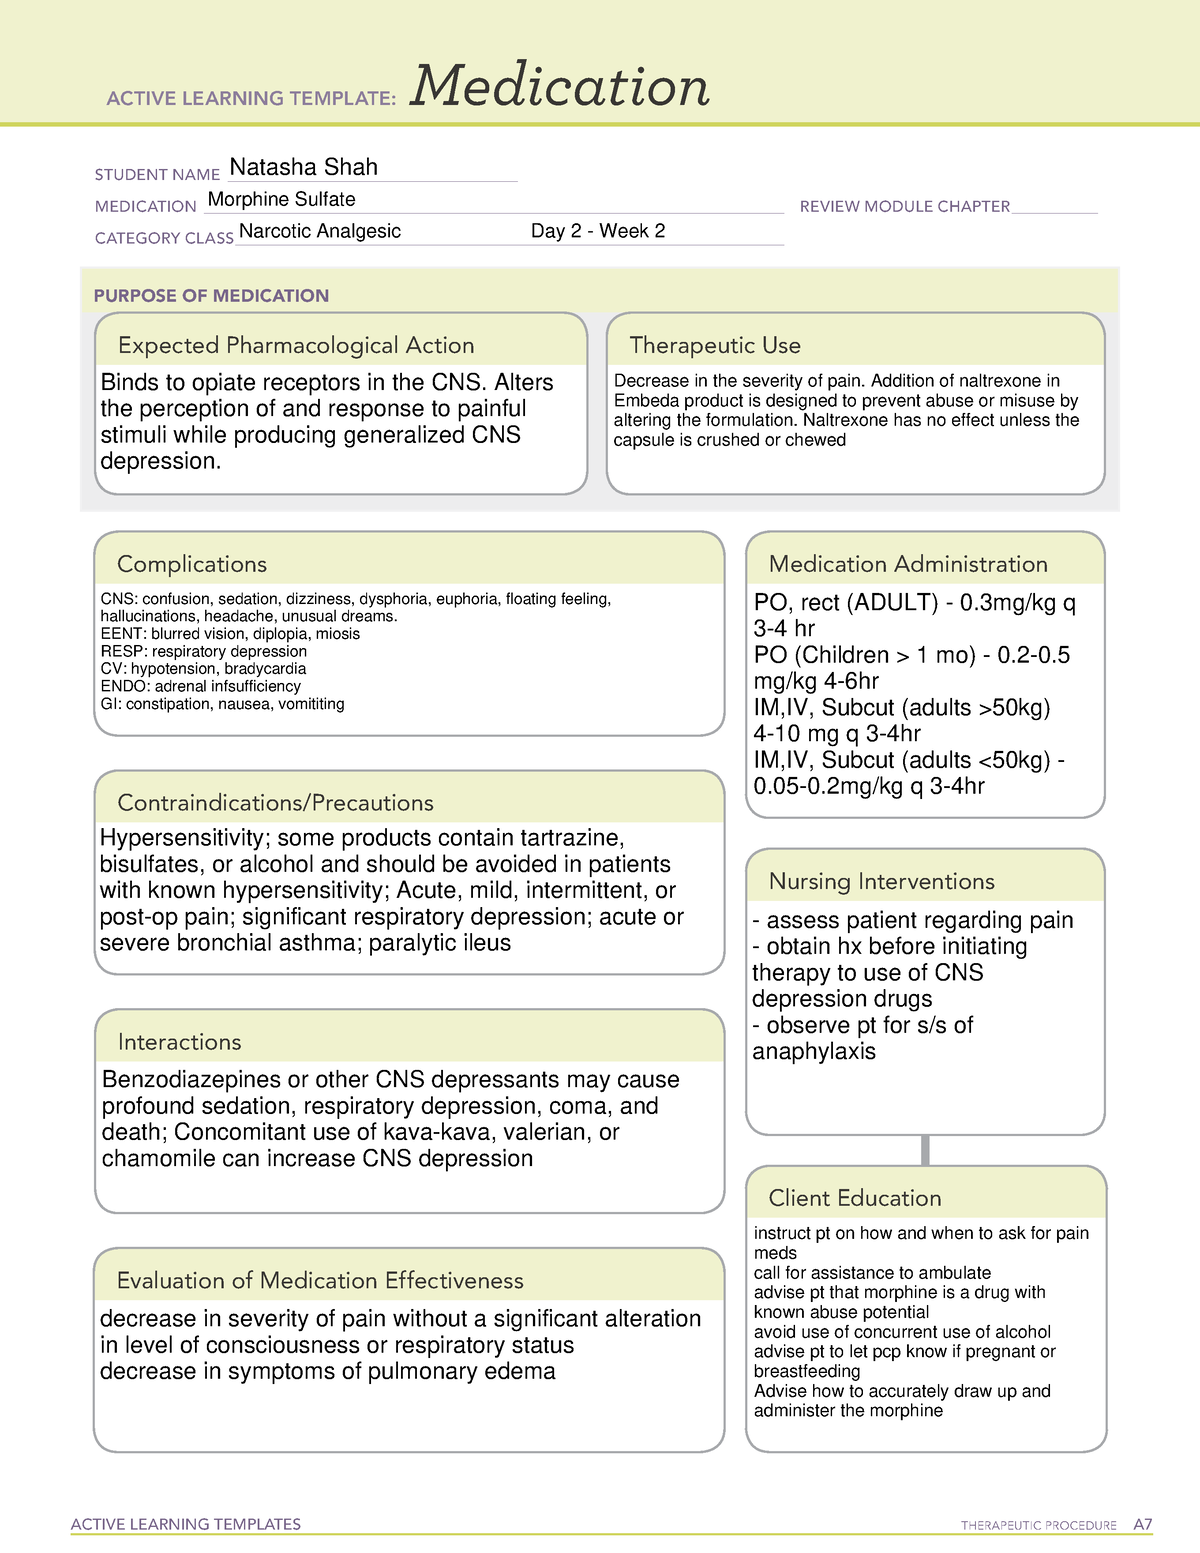 active-learning-template-medication-morphine-active-learning-templates-therapeutic